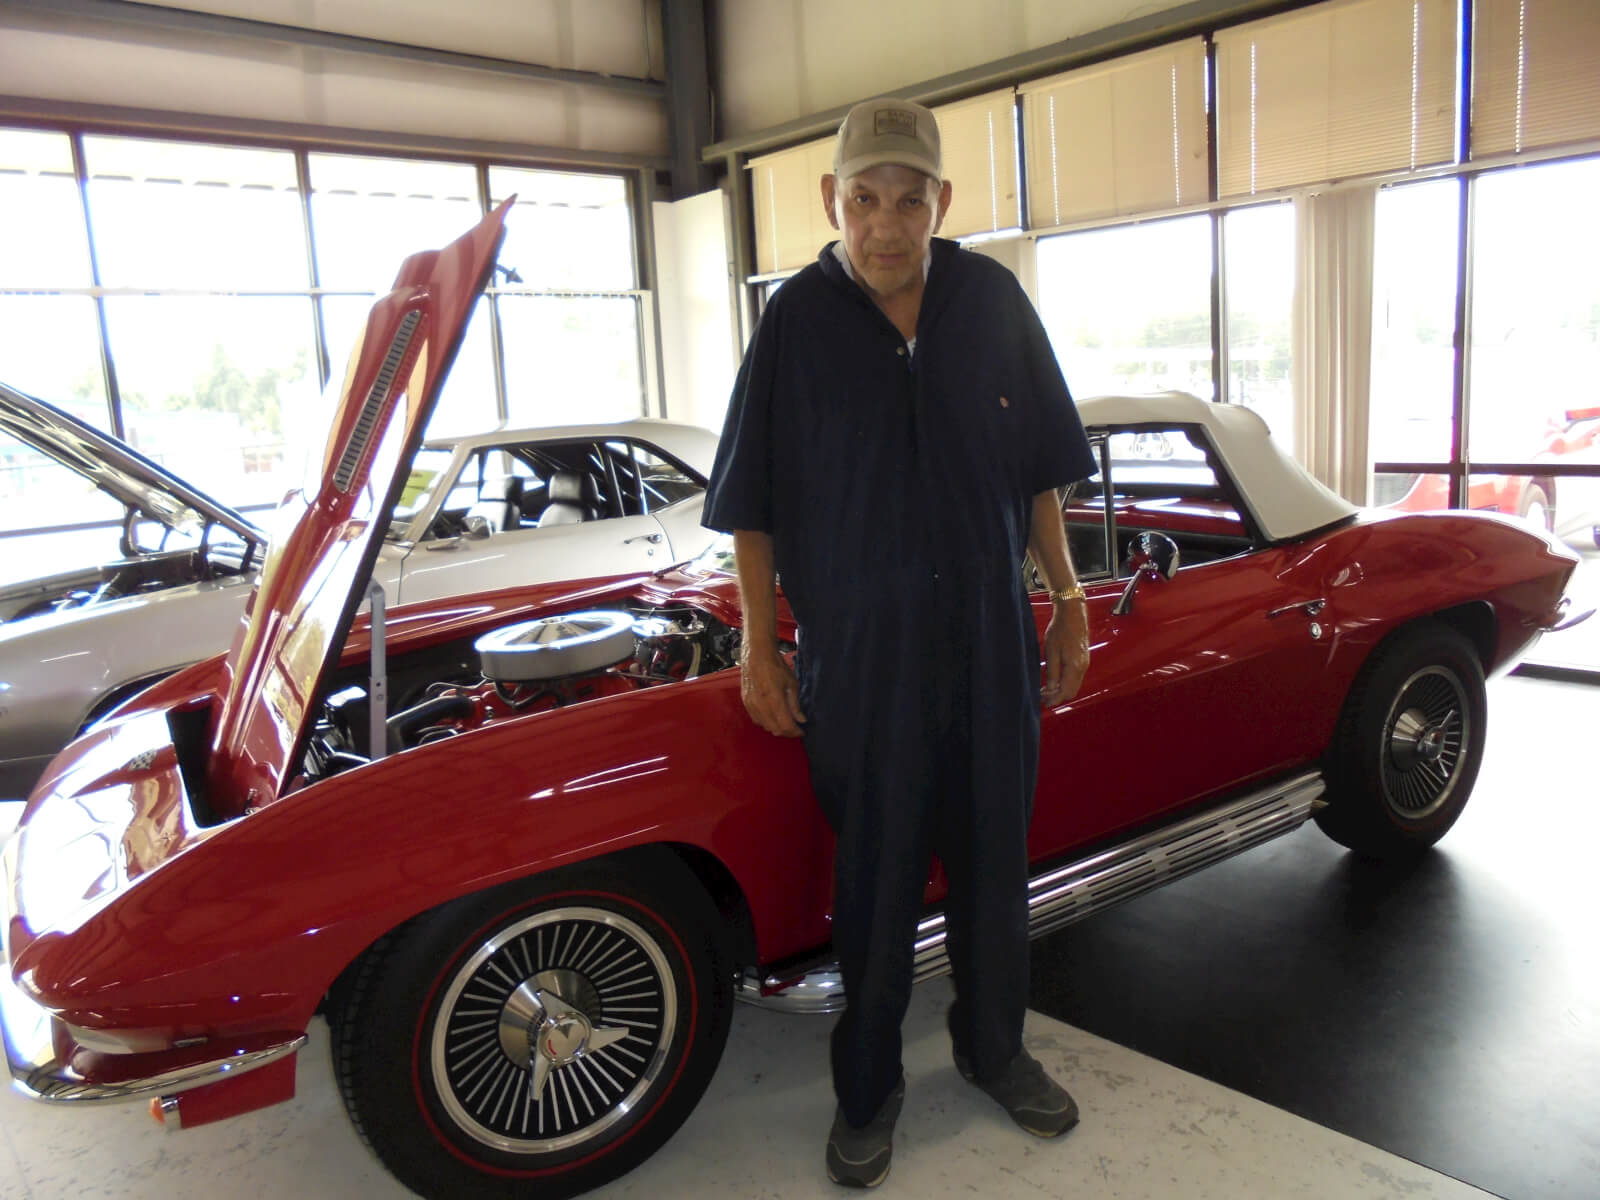 Oakview Commons resident Durwood Nichols posing with a classic car